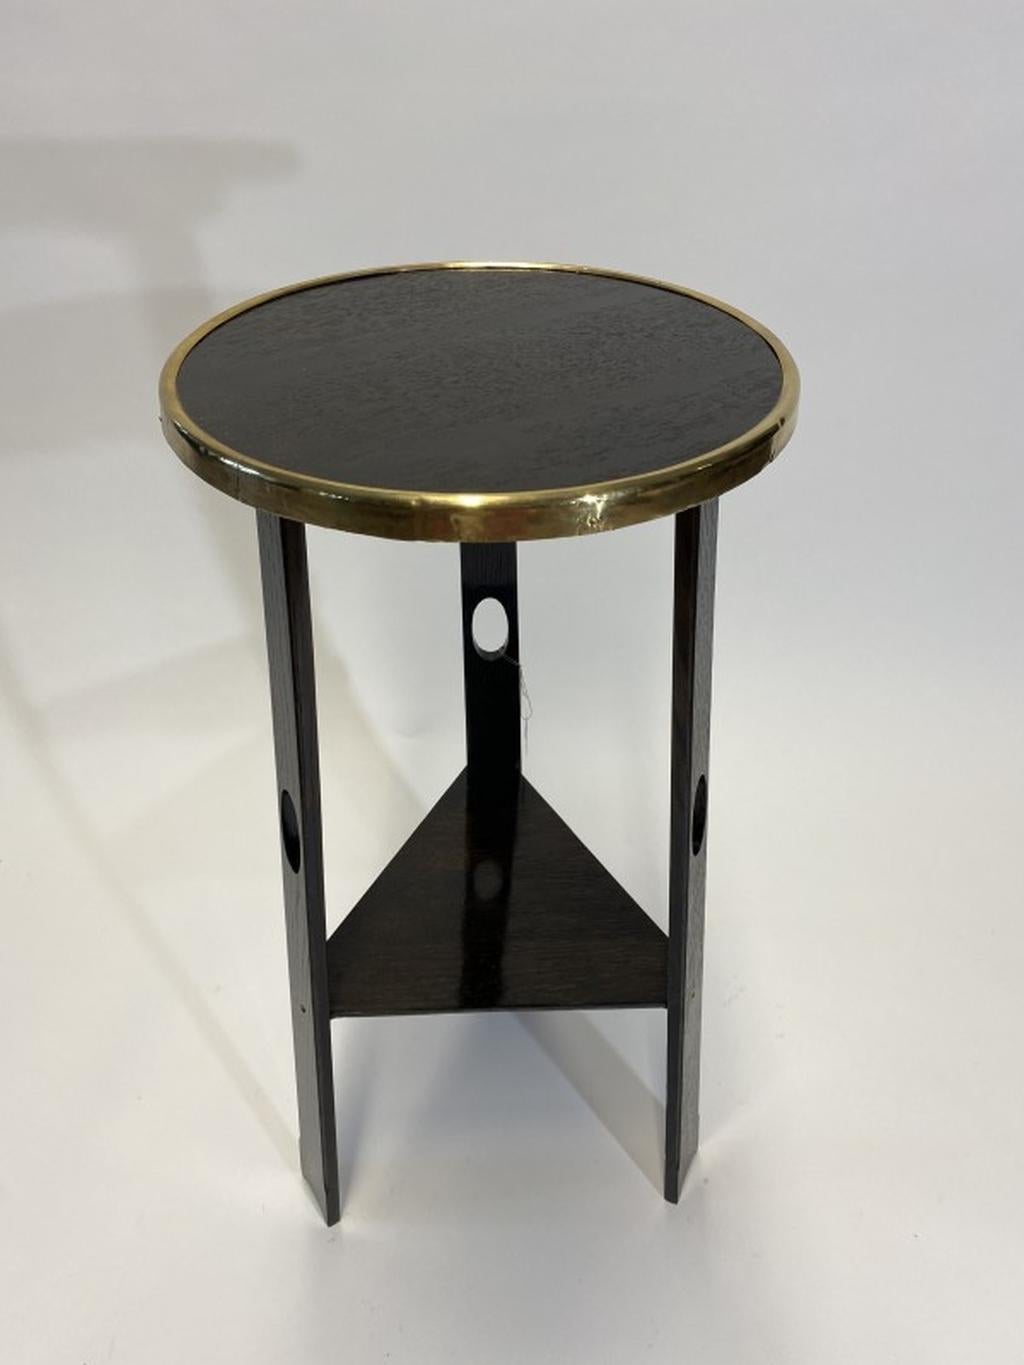 Small side table by Joseph Maria Olbrich. Professionally stained and repolished.